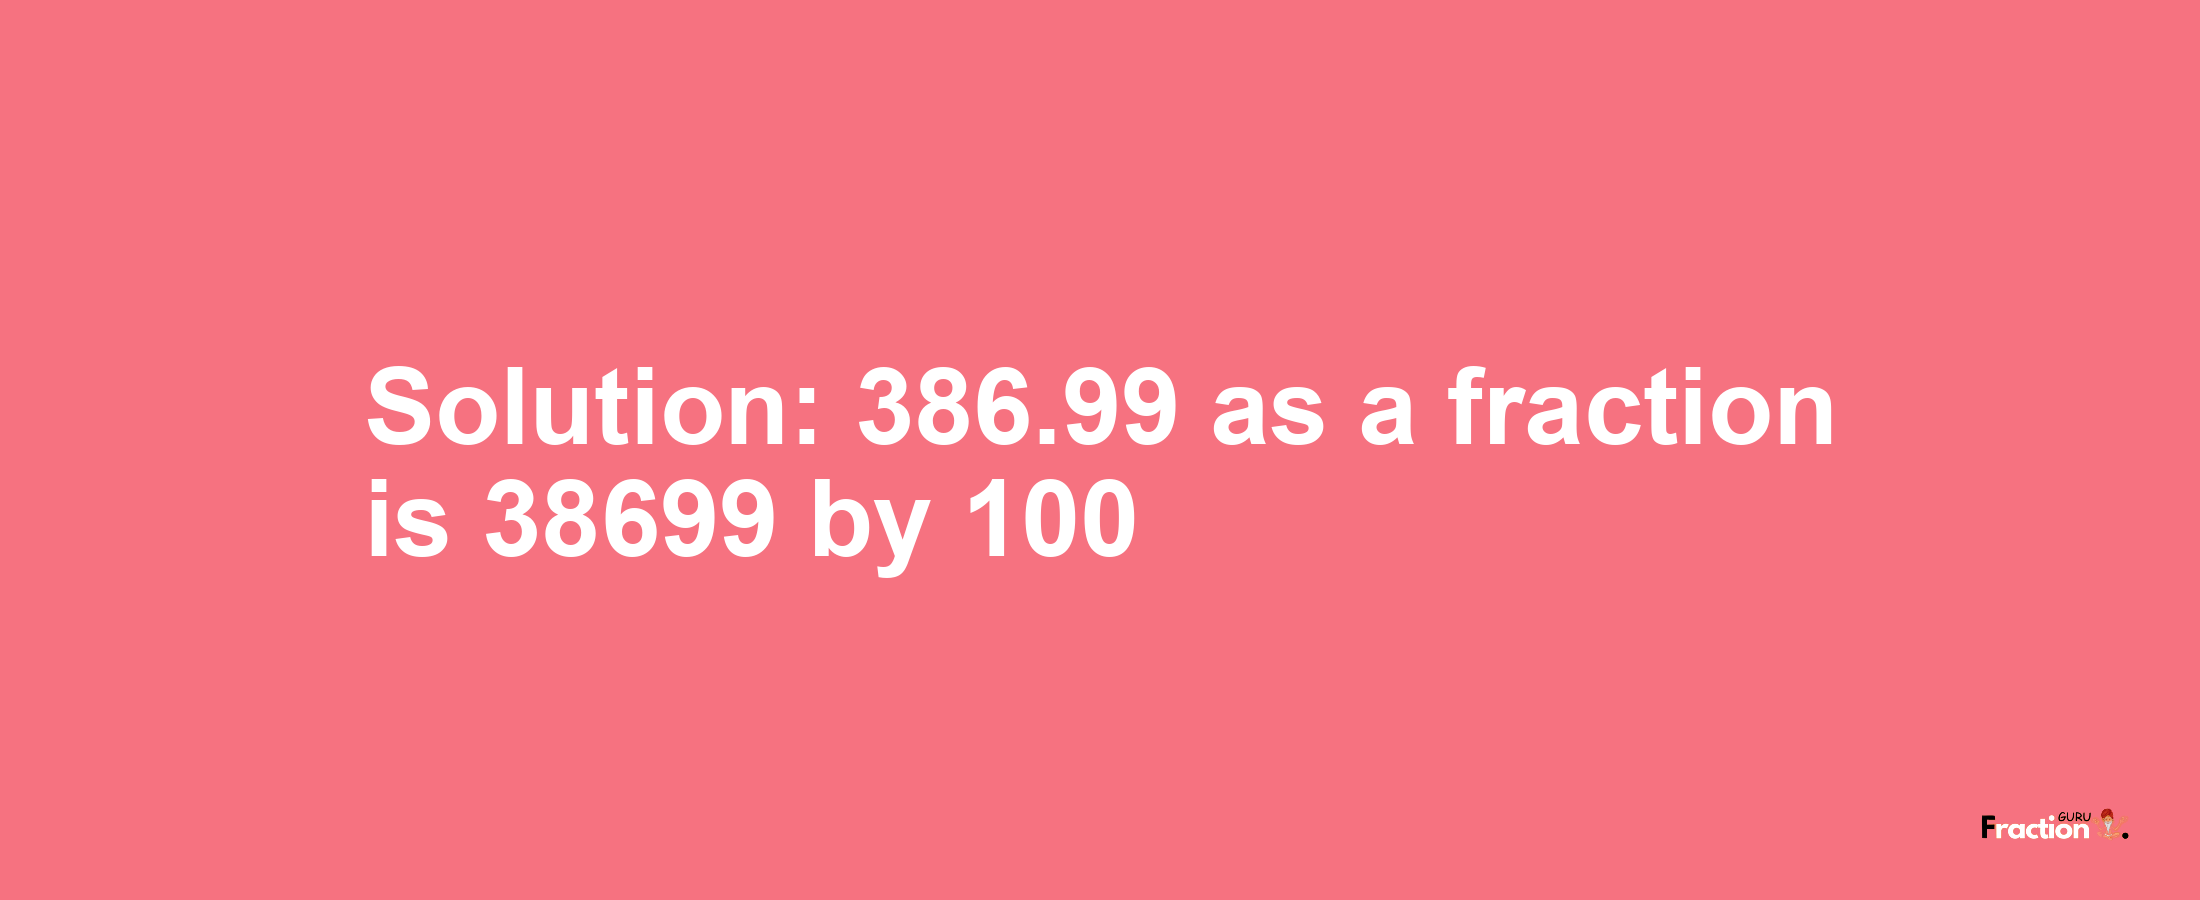 Solution:386.99 as a fraction is 38699/100